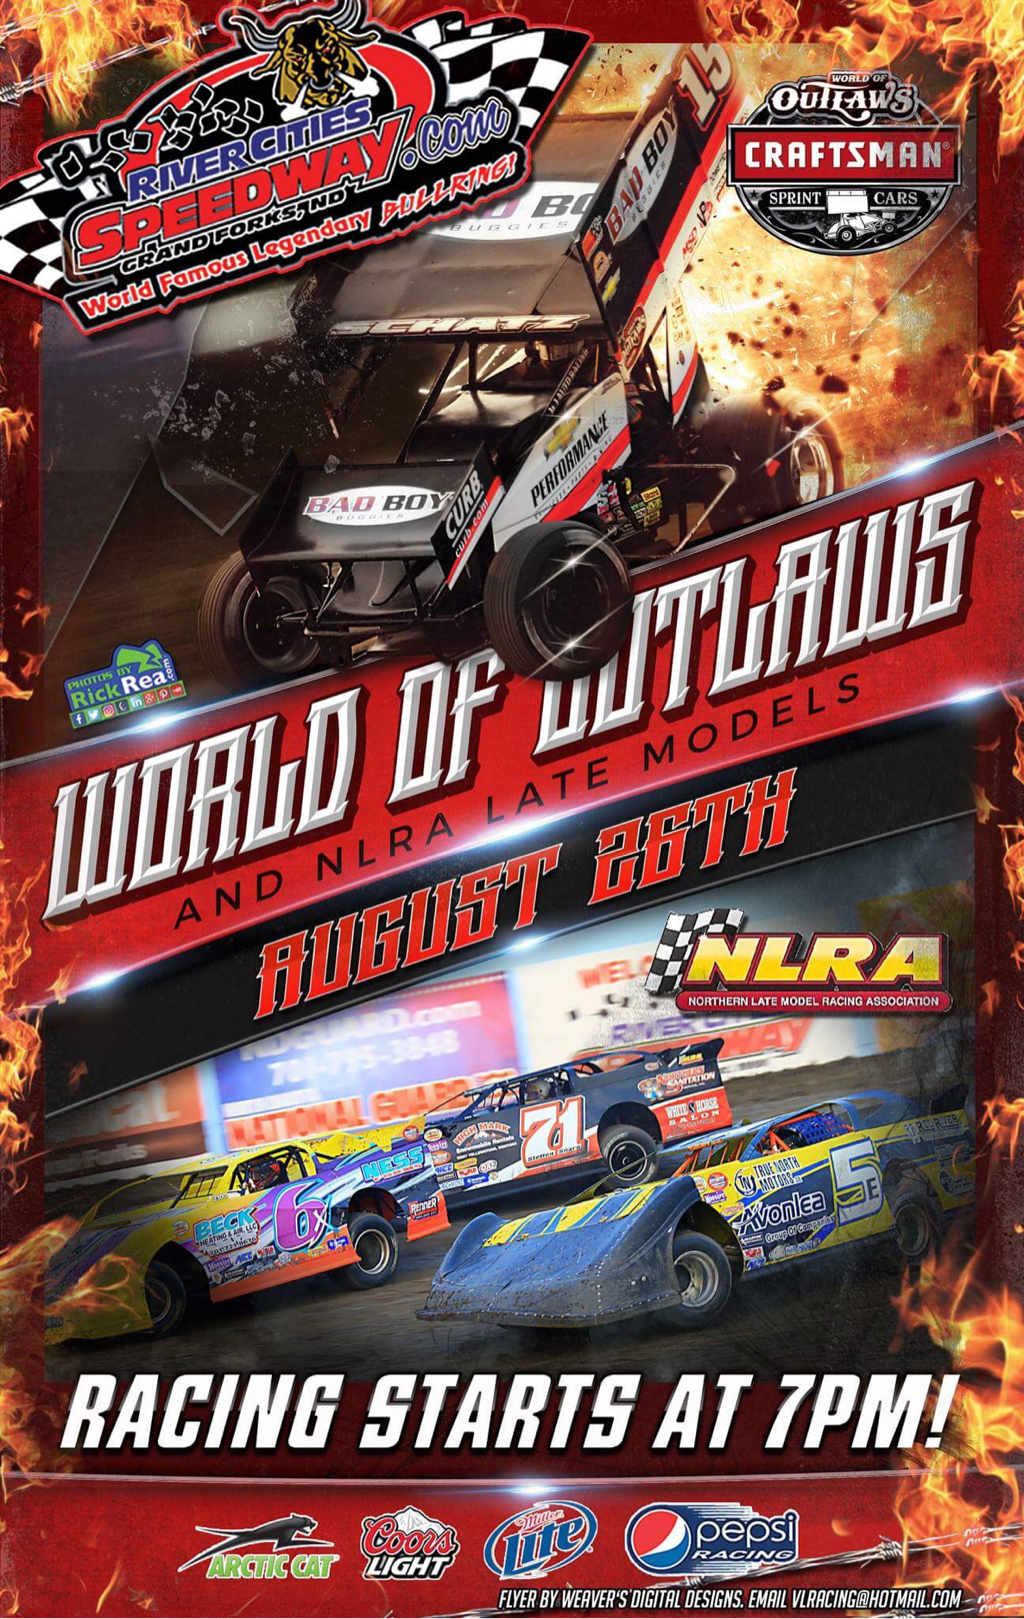 World of Outlaws Sprint Cars race at River Cities Speedway featuring Outlaw Sprints and WISSOTA NLRA Lae Models 